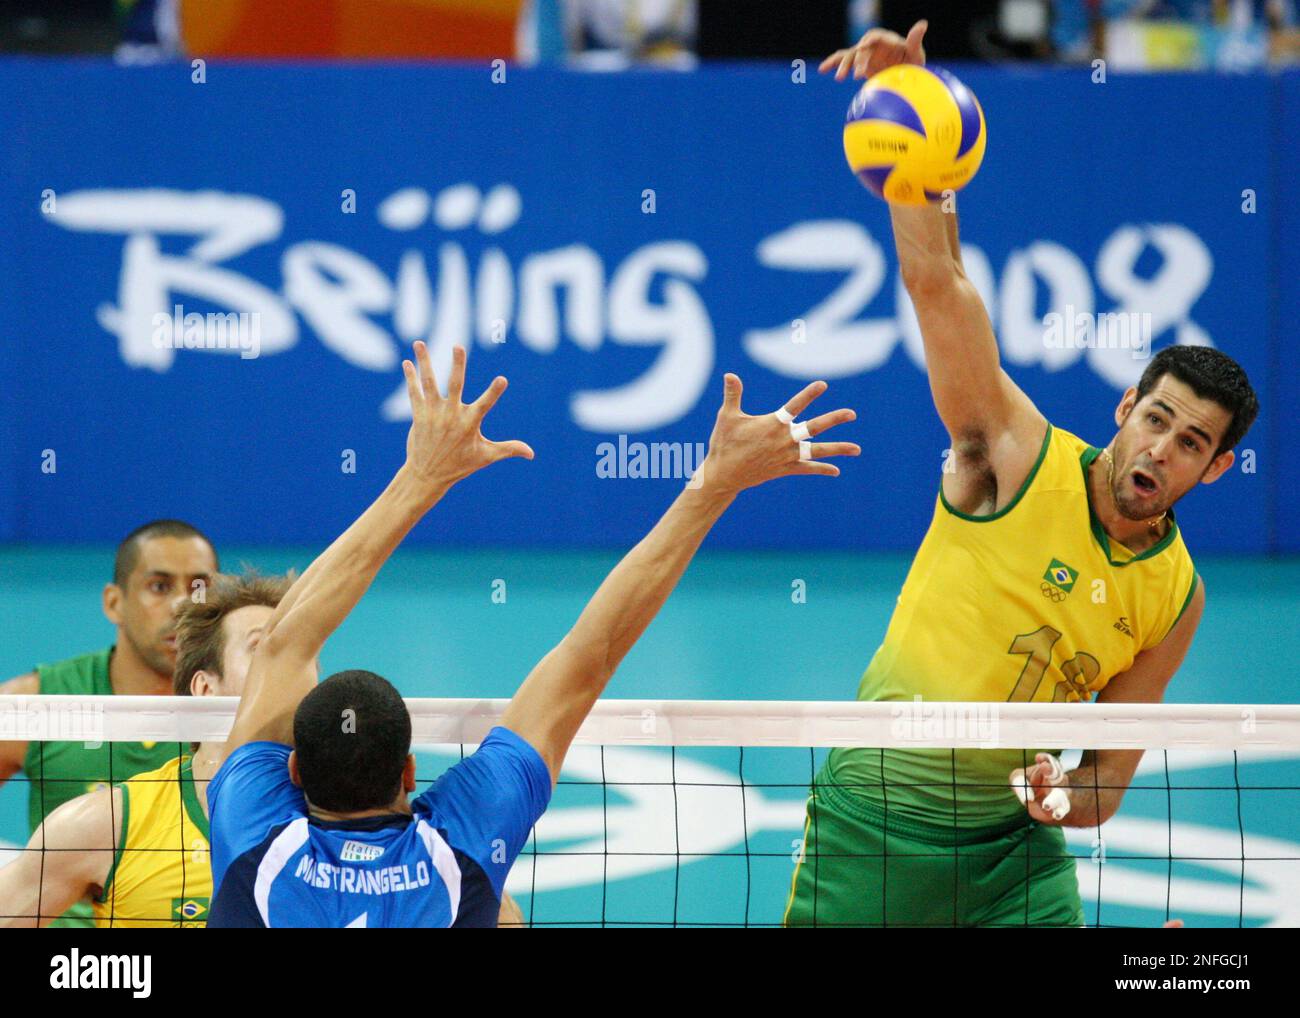 Dante Amaral of Brazil spikes against Luigi Mastrangelo of Italy in a men's semifinals volleyball match during the Beijing 2008 Olympics in Beijing, Friday, Aug 22, 2008. (AP Photo/Koji Sasahara) Stock Photo